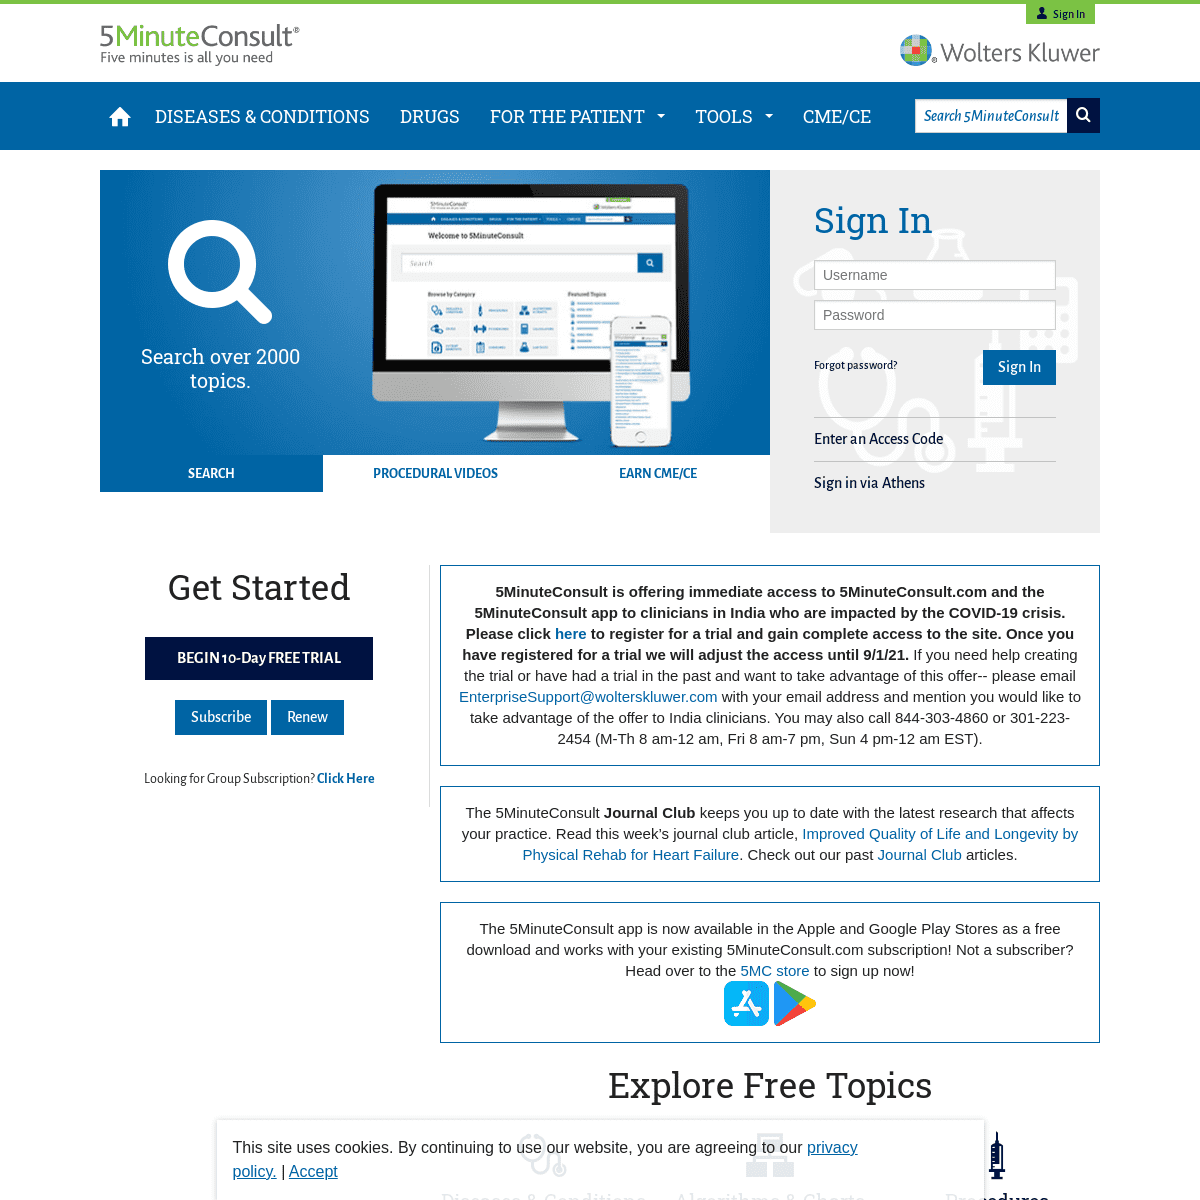 A complete backup of https://5minuteconsult.com